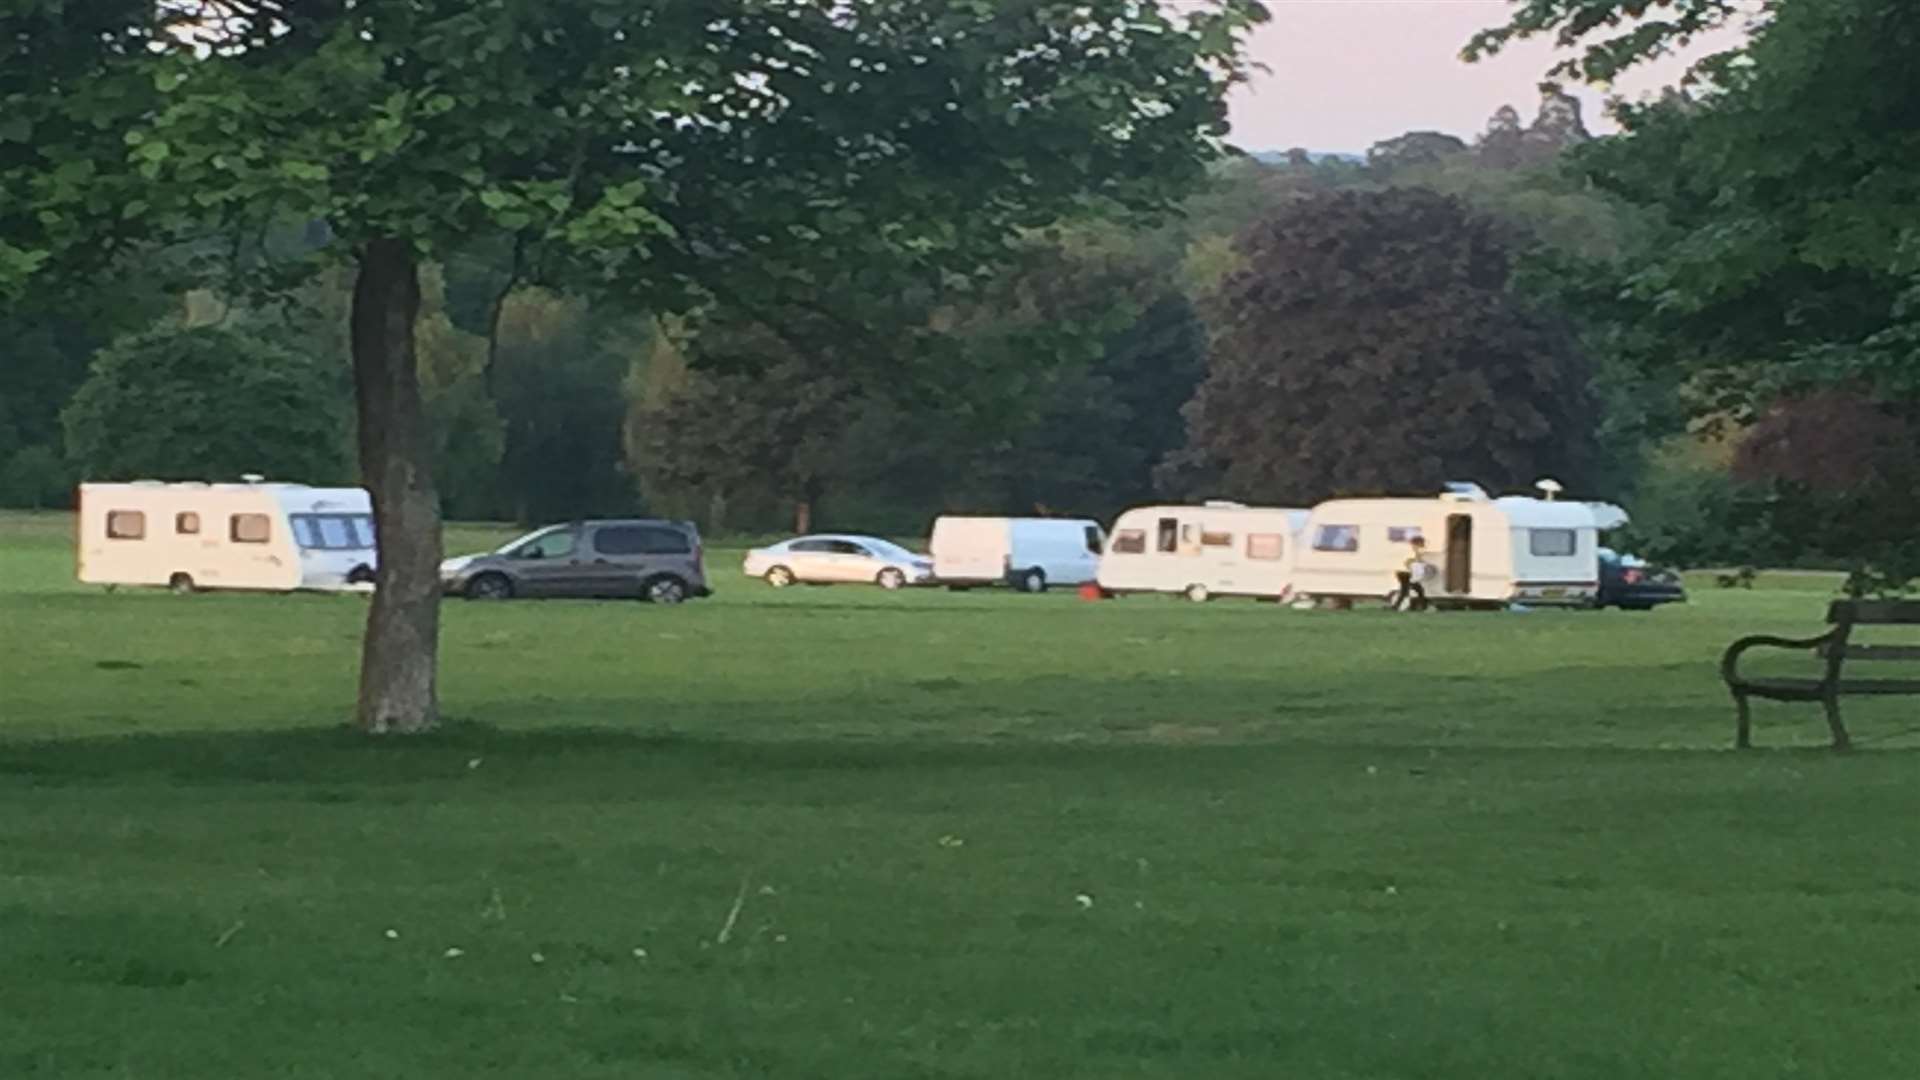 The caravans have been pitched at Mote Park in Maidstone